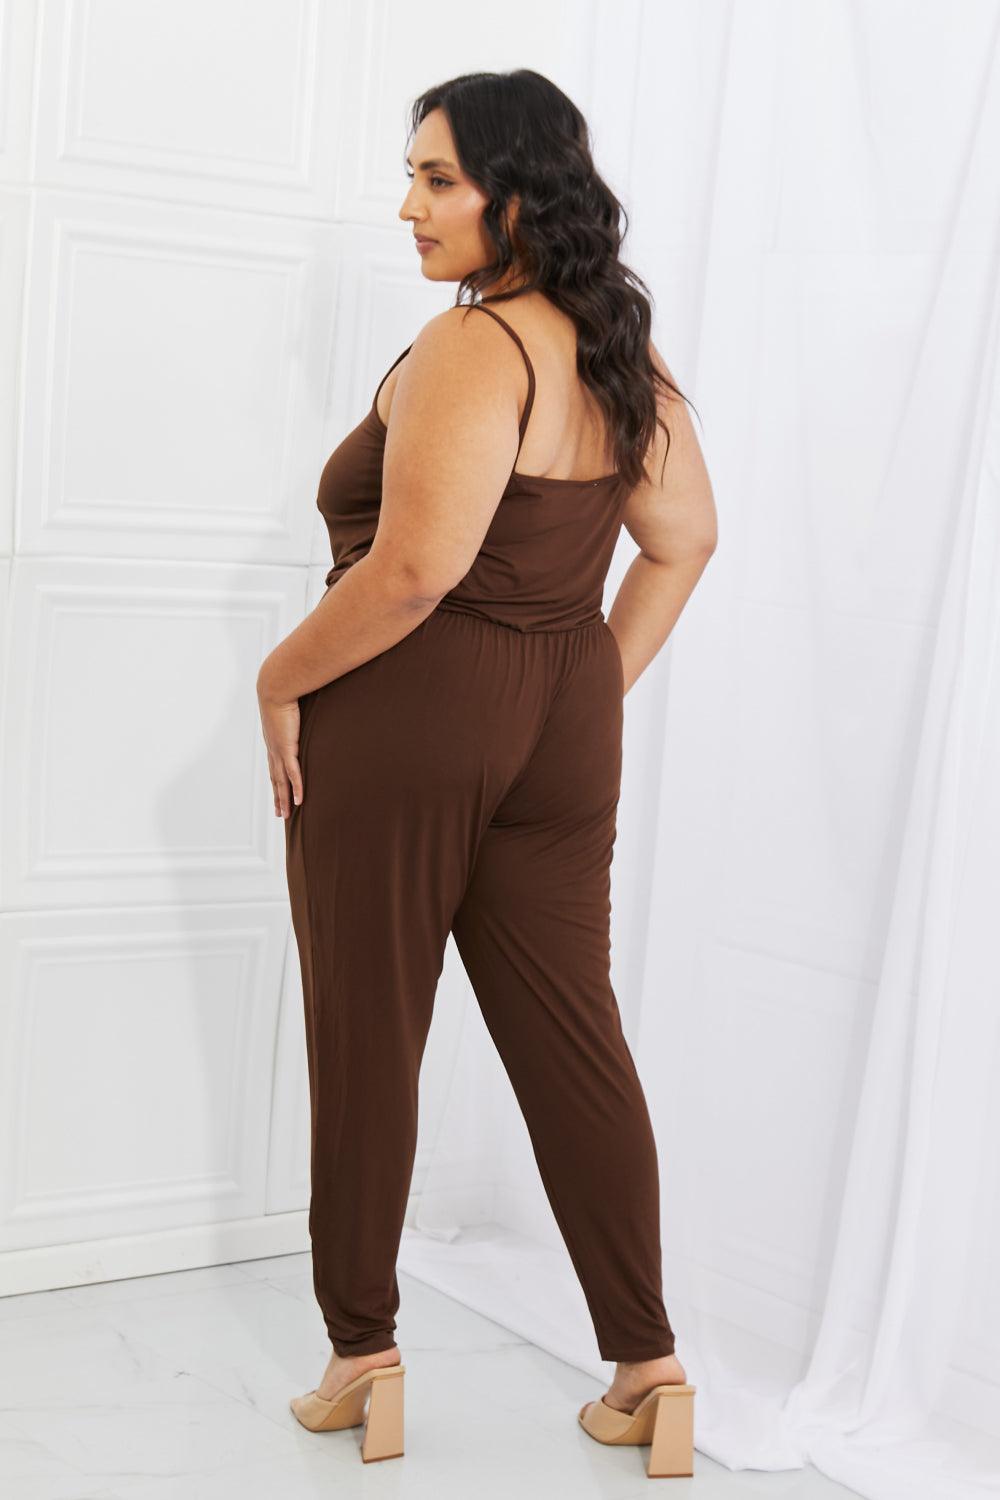 Capella Comfy Casual Full Size Solid Elastic Waistband Jumpsuit in Chocolate - Glamorous Boutique USA L.L.C.